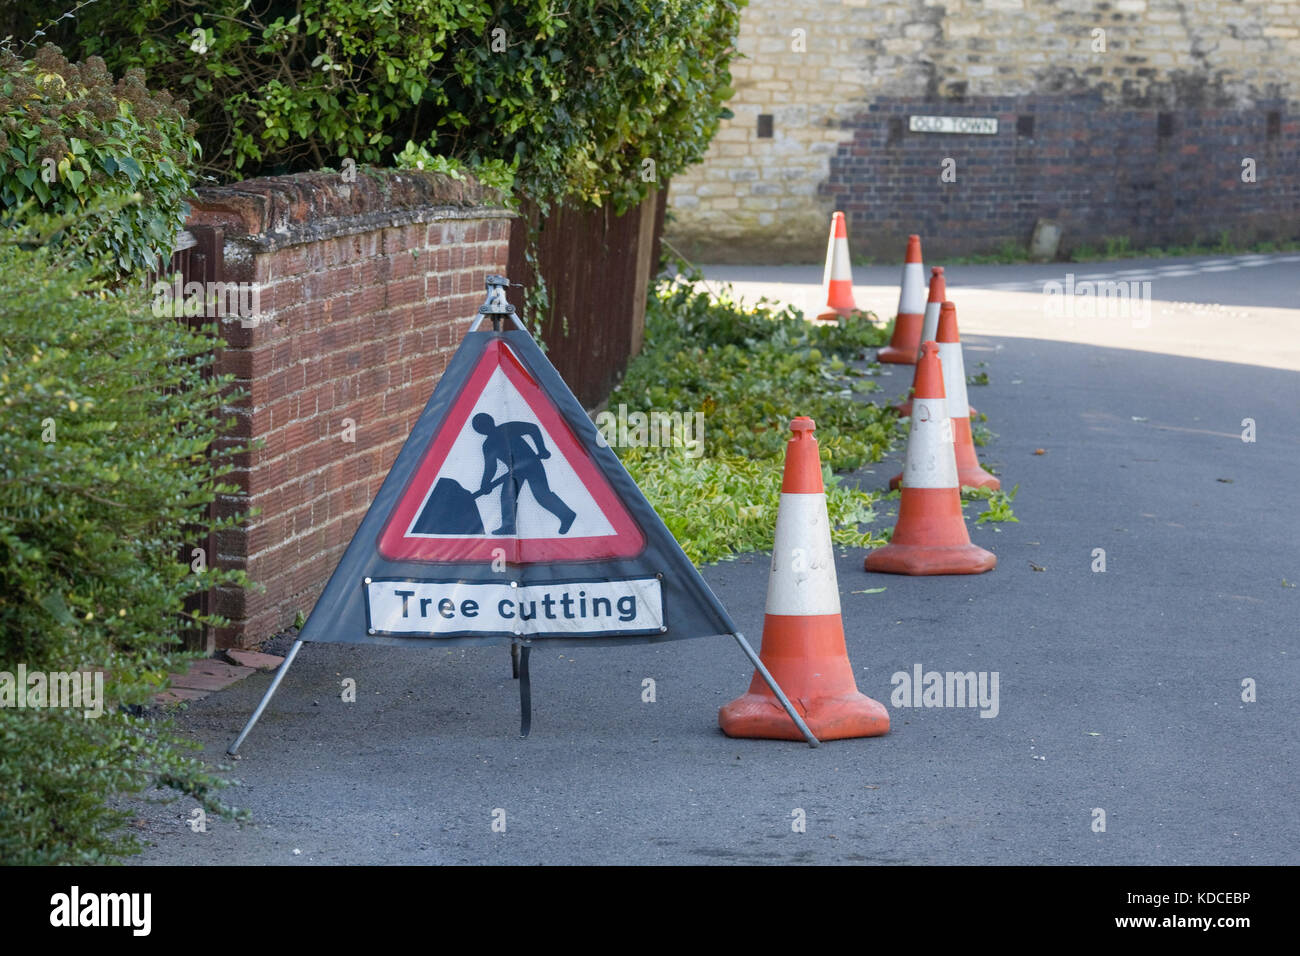 Cutting back overgrown shrubs on a public highway. Stock Photo